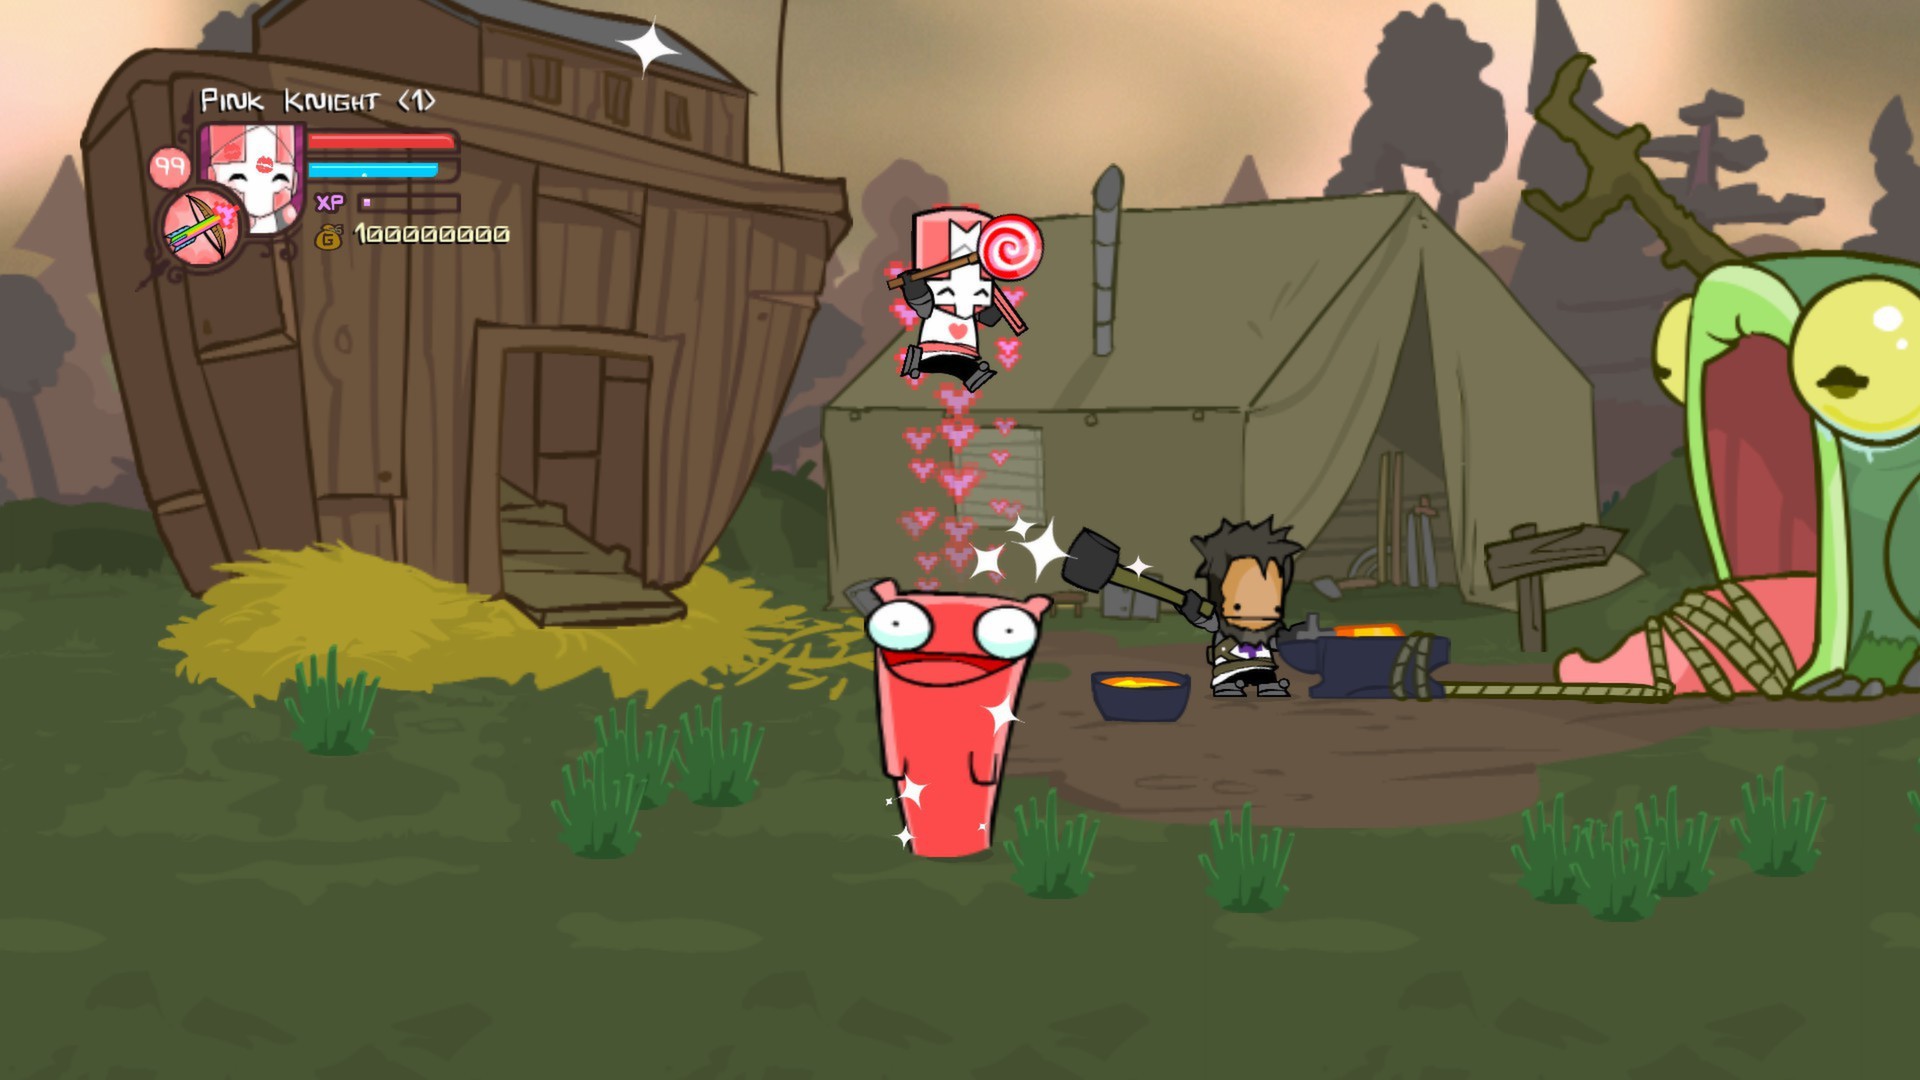 Castle Crashers Remastered - The BEST Starting Knights to use 